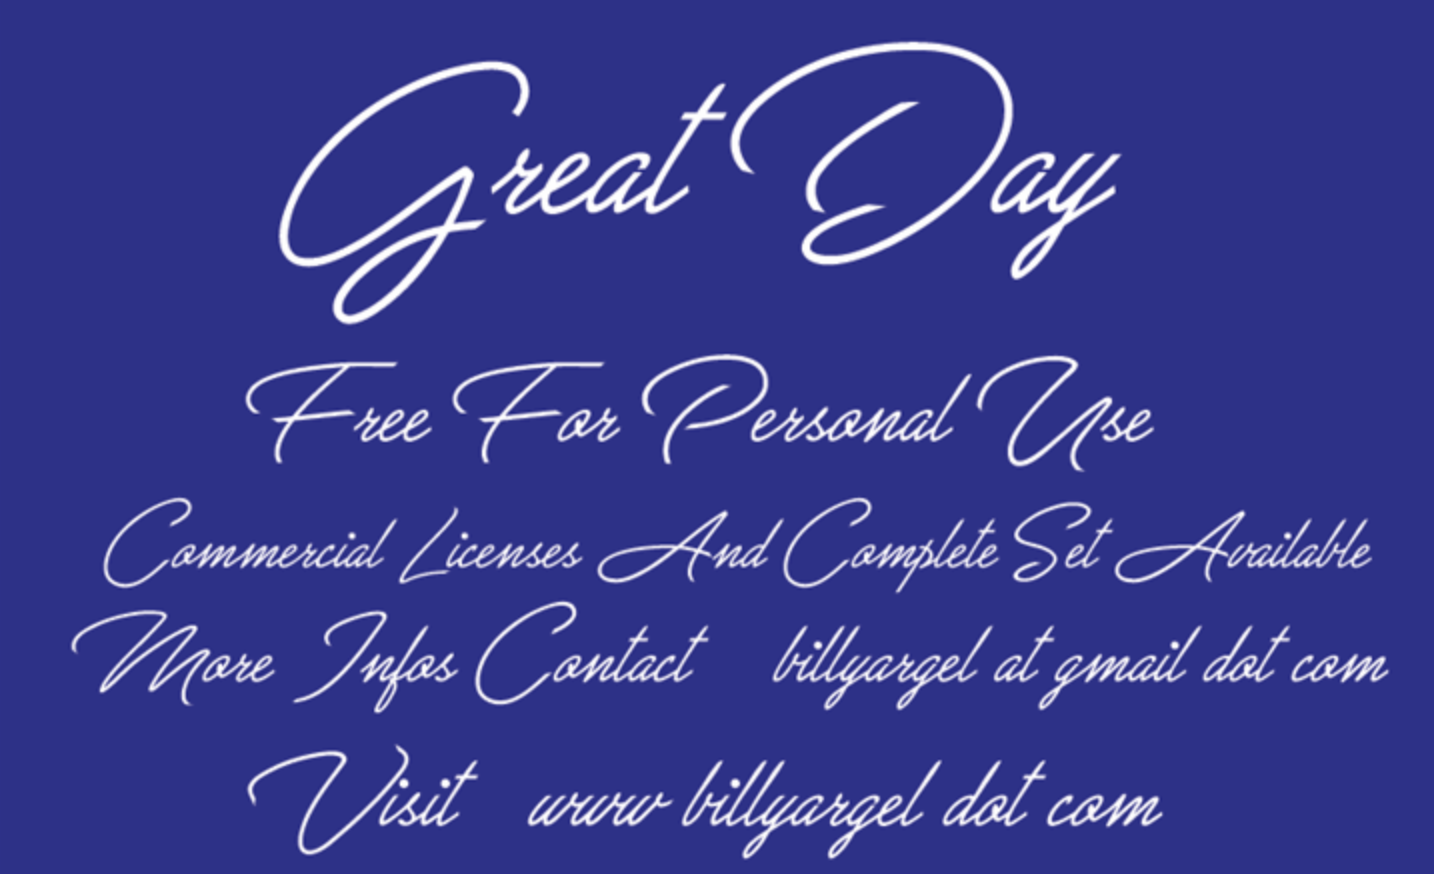 Retro calligraphy font called Great Day